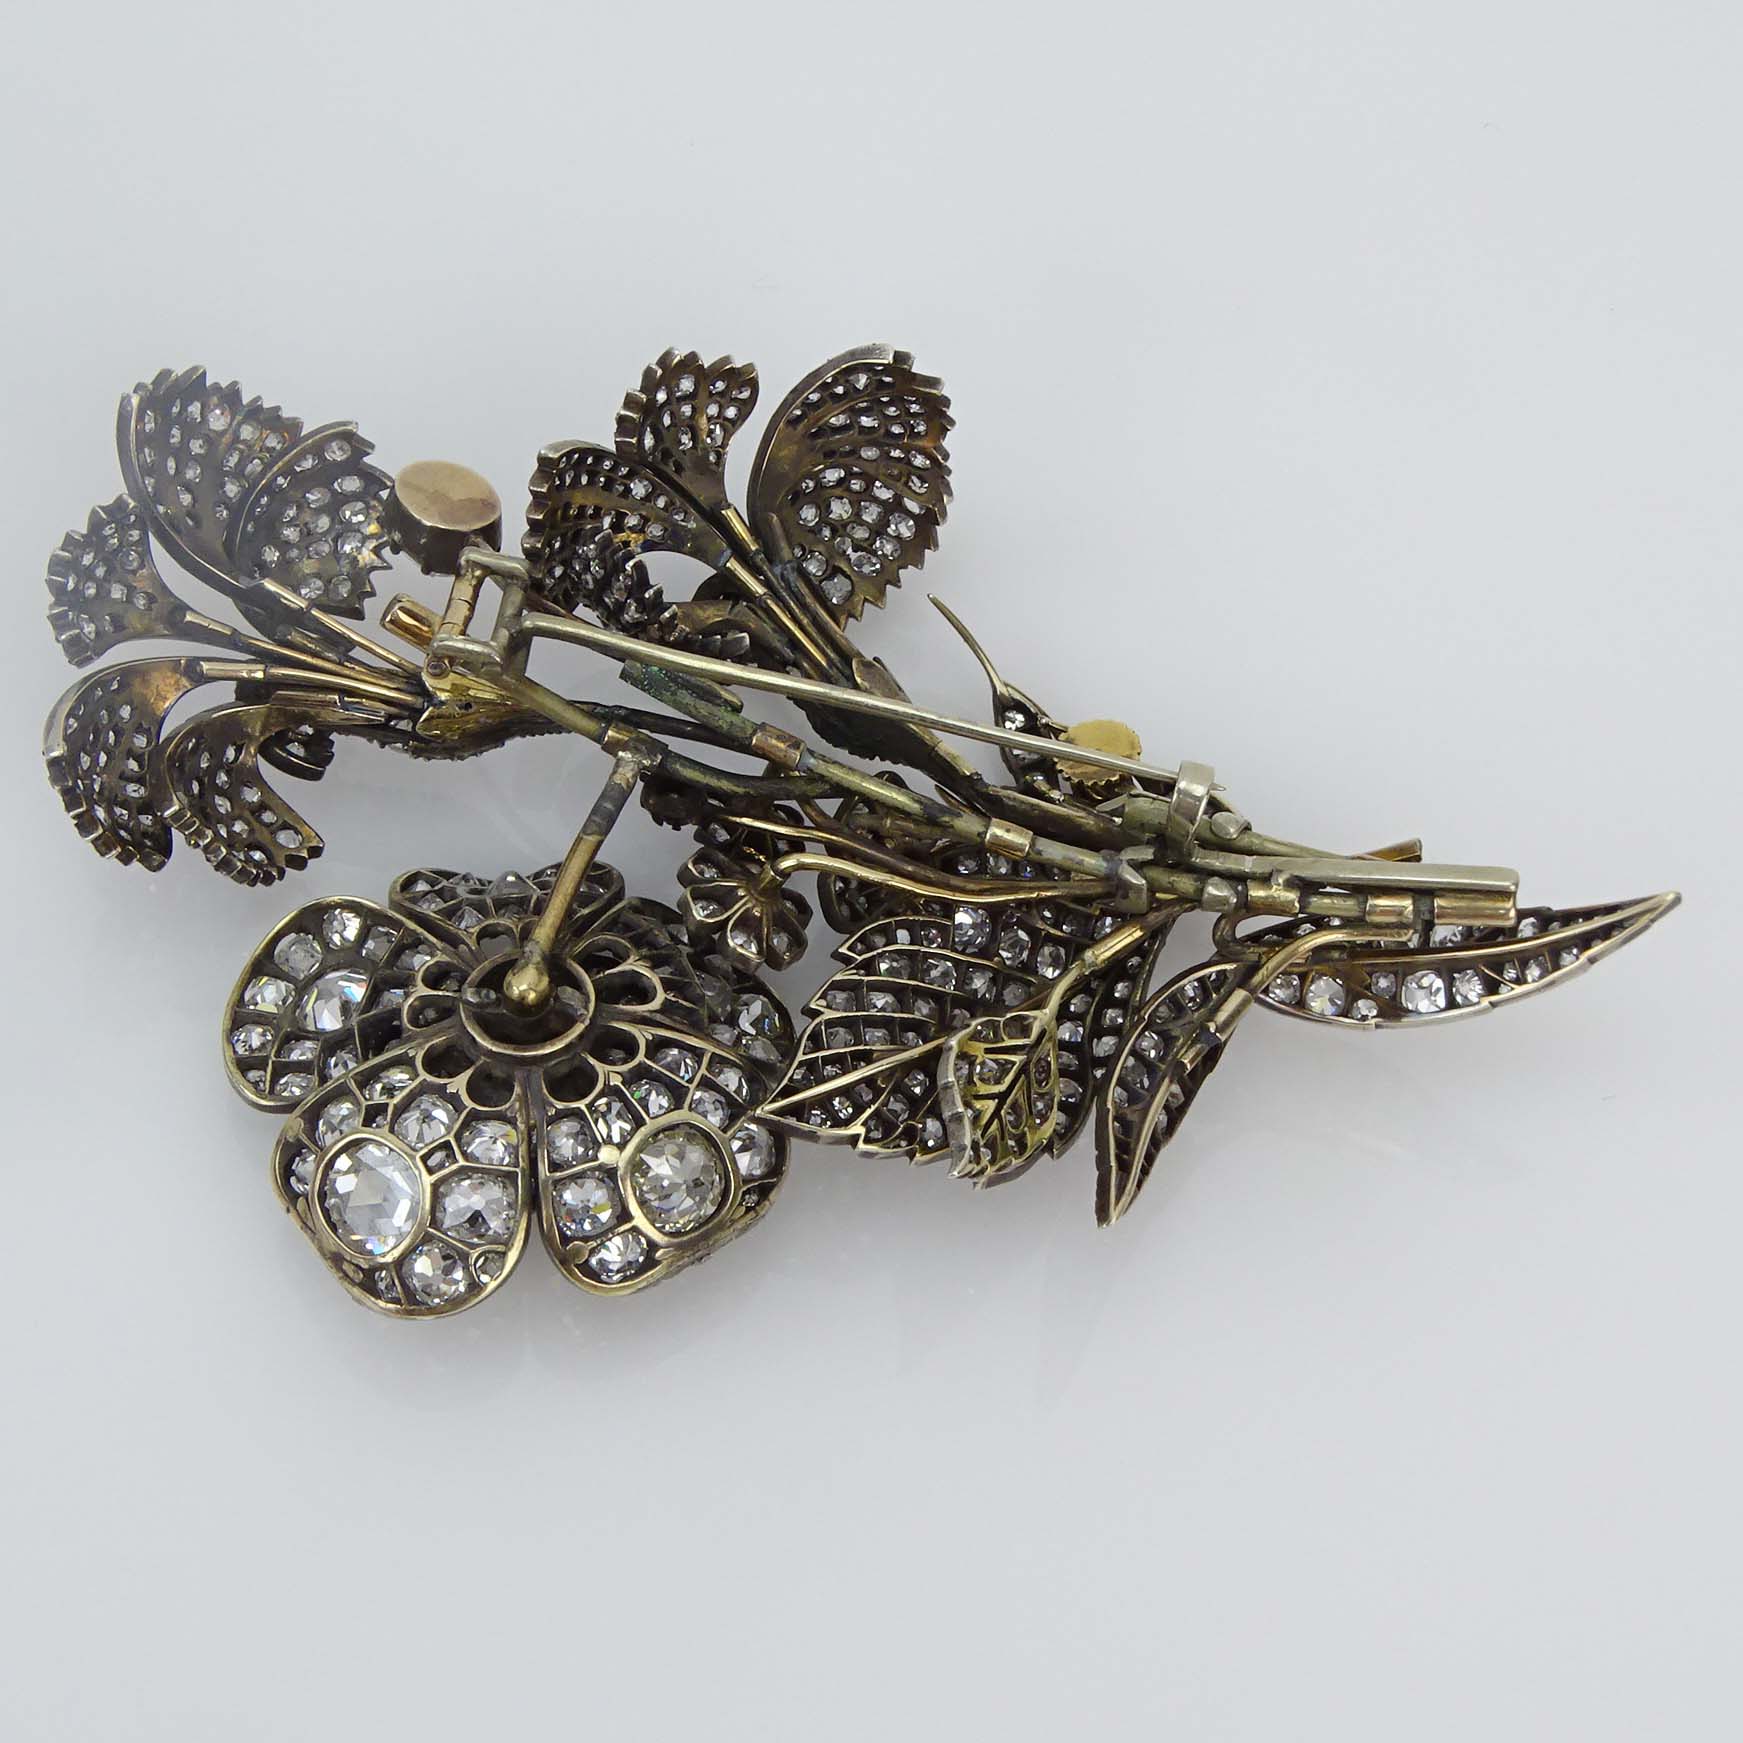 Large 19th Century Approx. 20.00 Carat Rose Cut and Old European Cut Diamond and Silver Flower Brooch en tremblant.